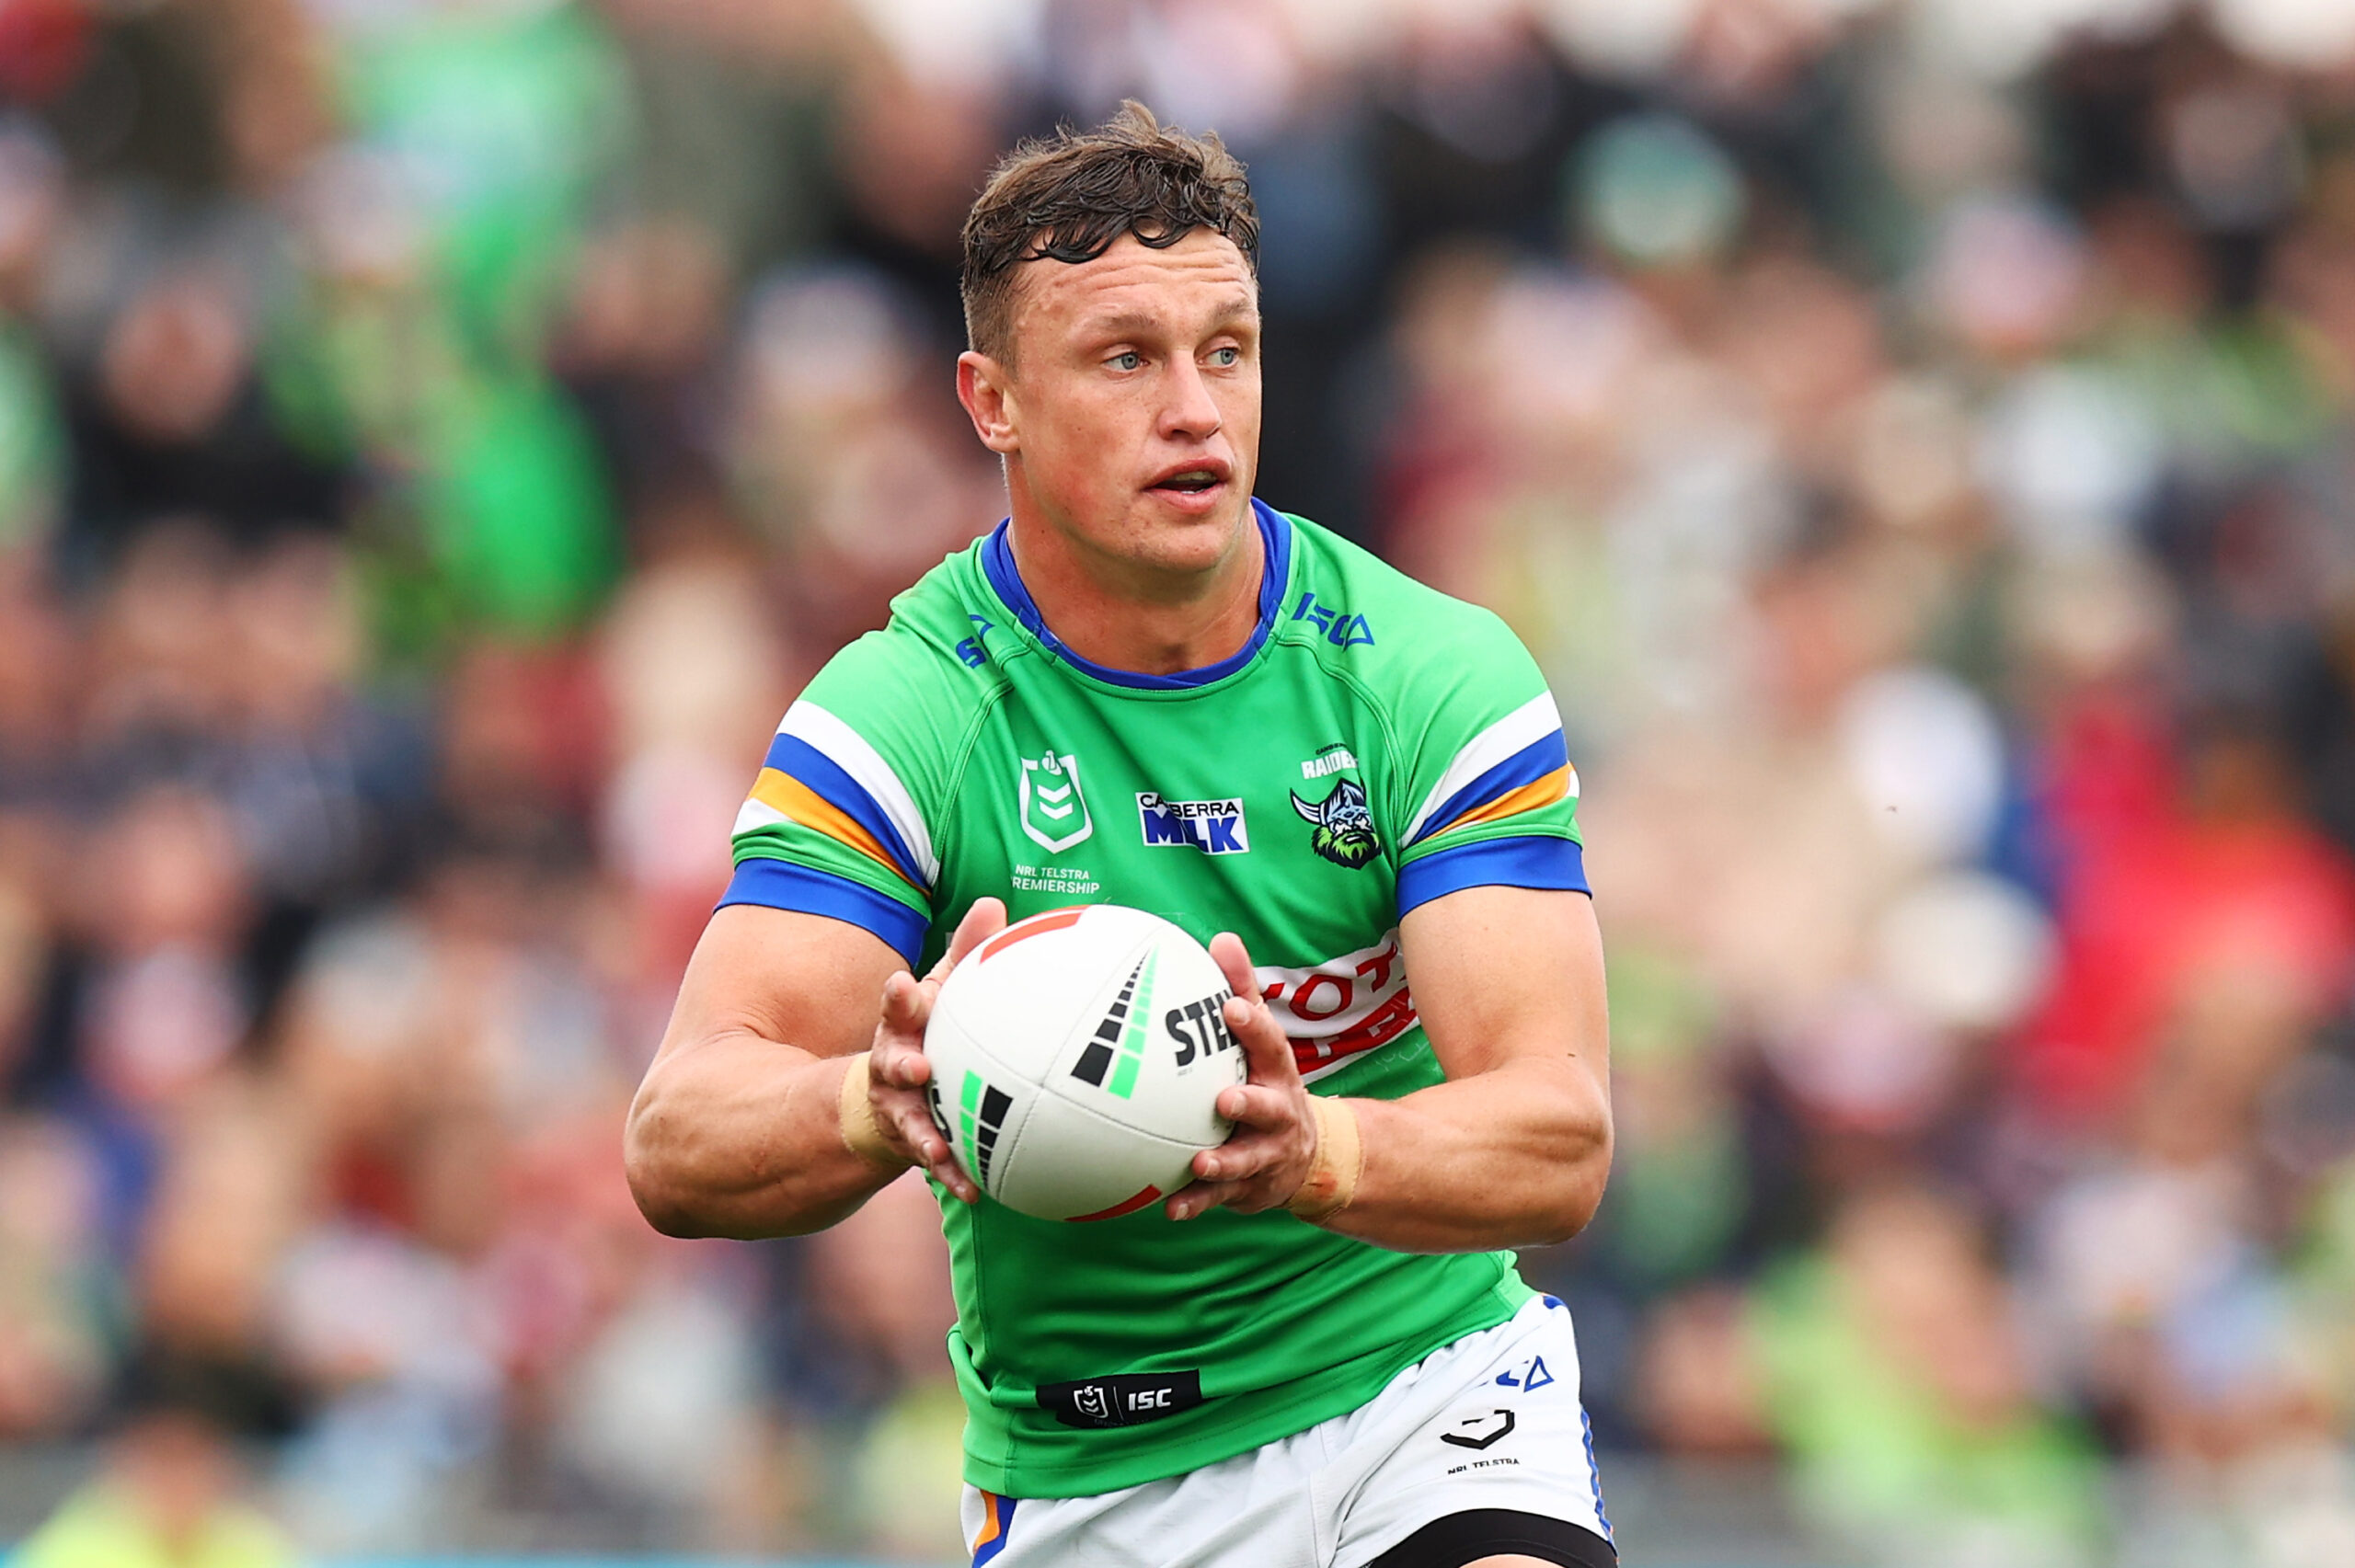 Newcastle Knights vs Canberra Raiders live stream guide How to watch NRL elimination final on TV or online, start time, team lists - NRL News